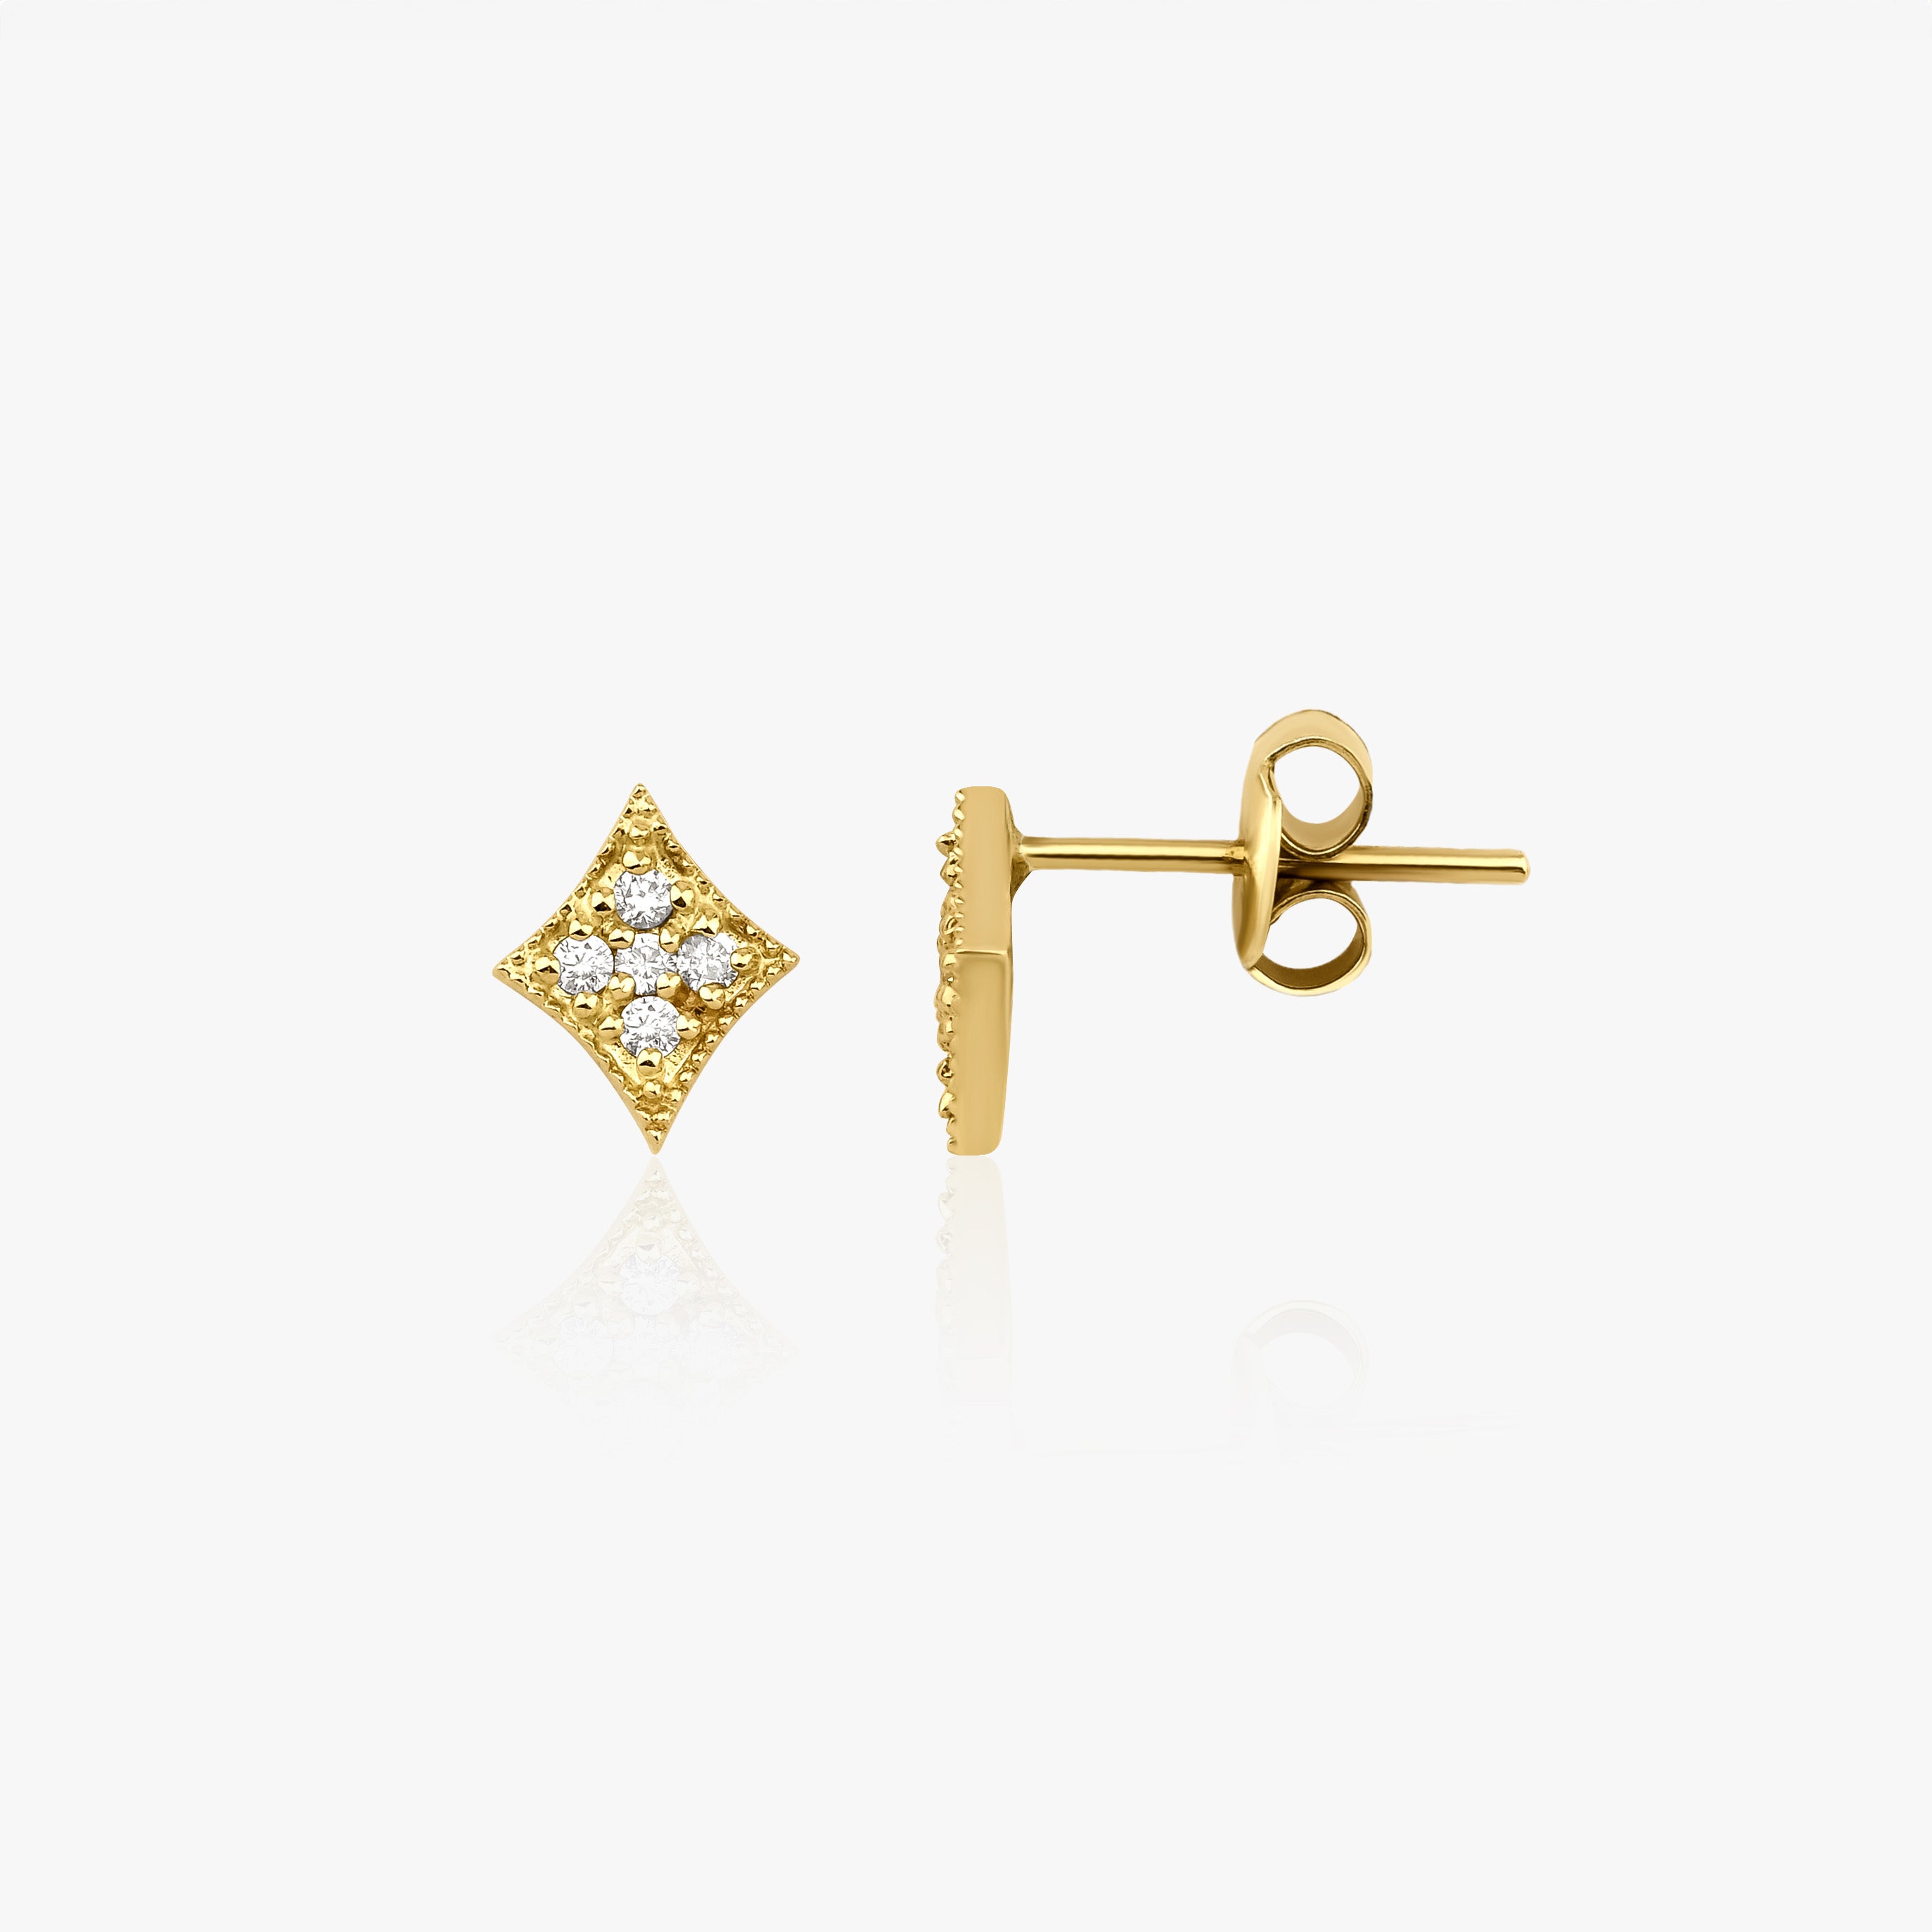 Dainty Diamond Stud Earrings Available in 14K and 18K Gold